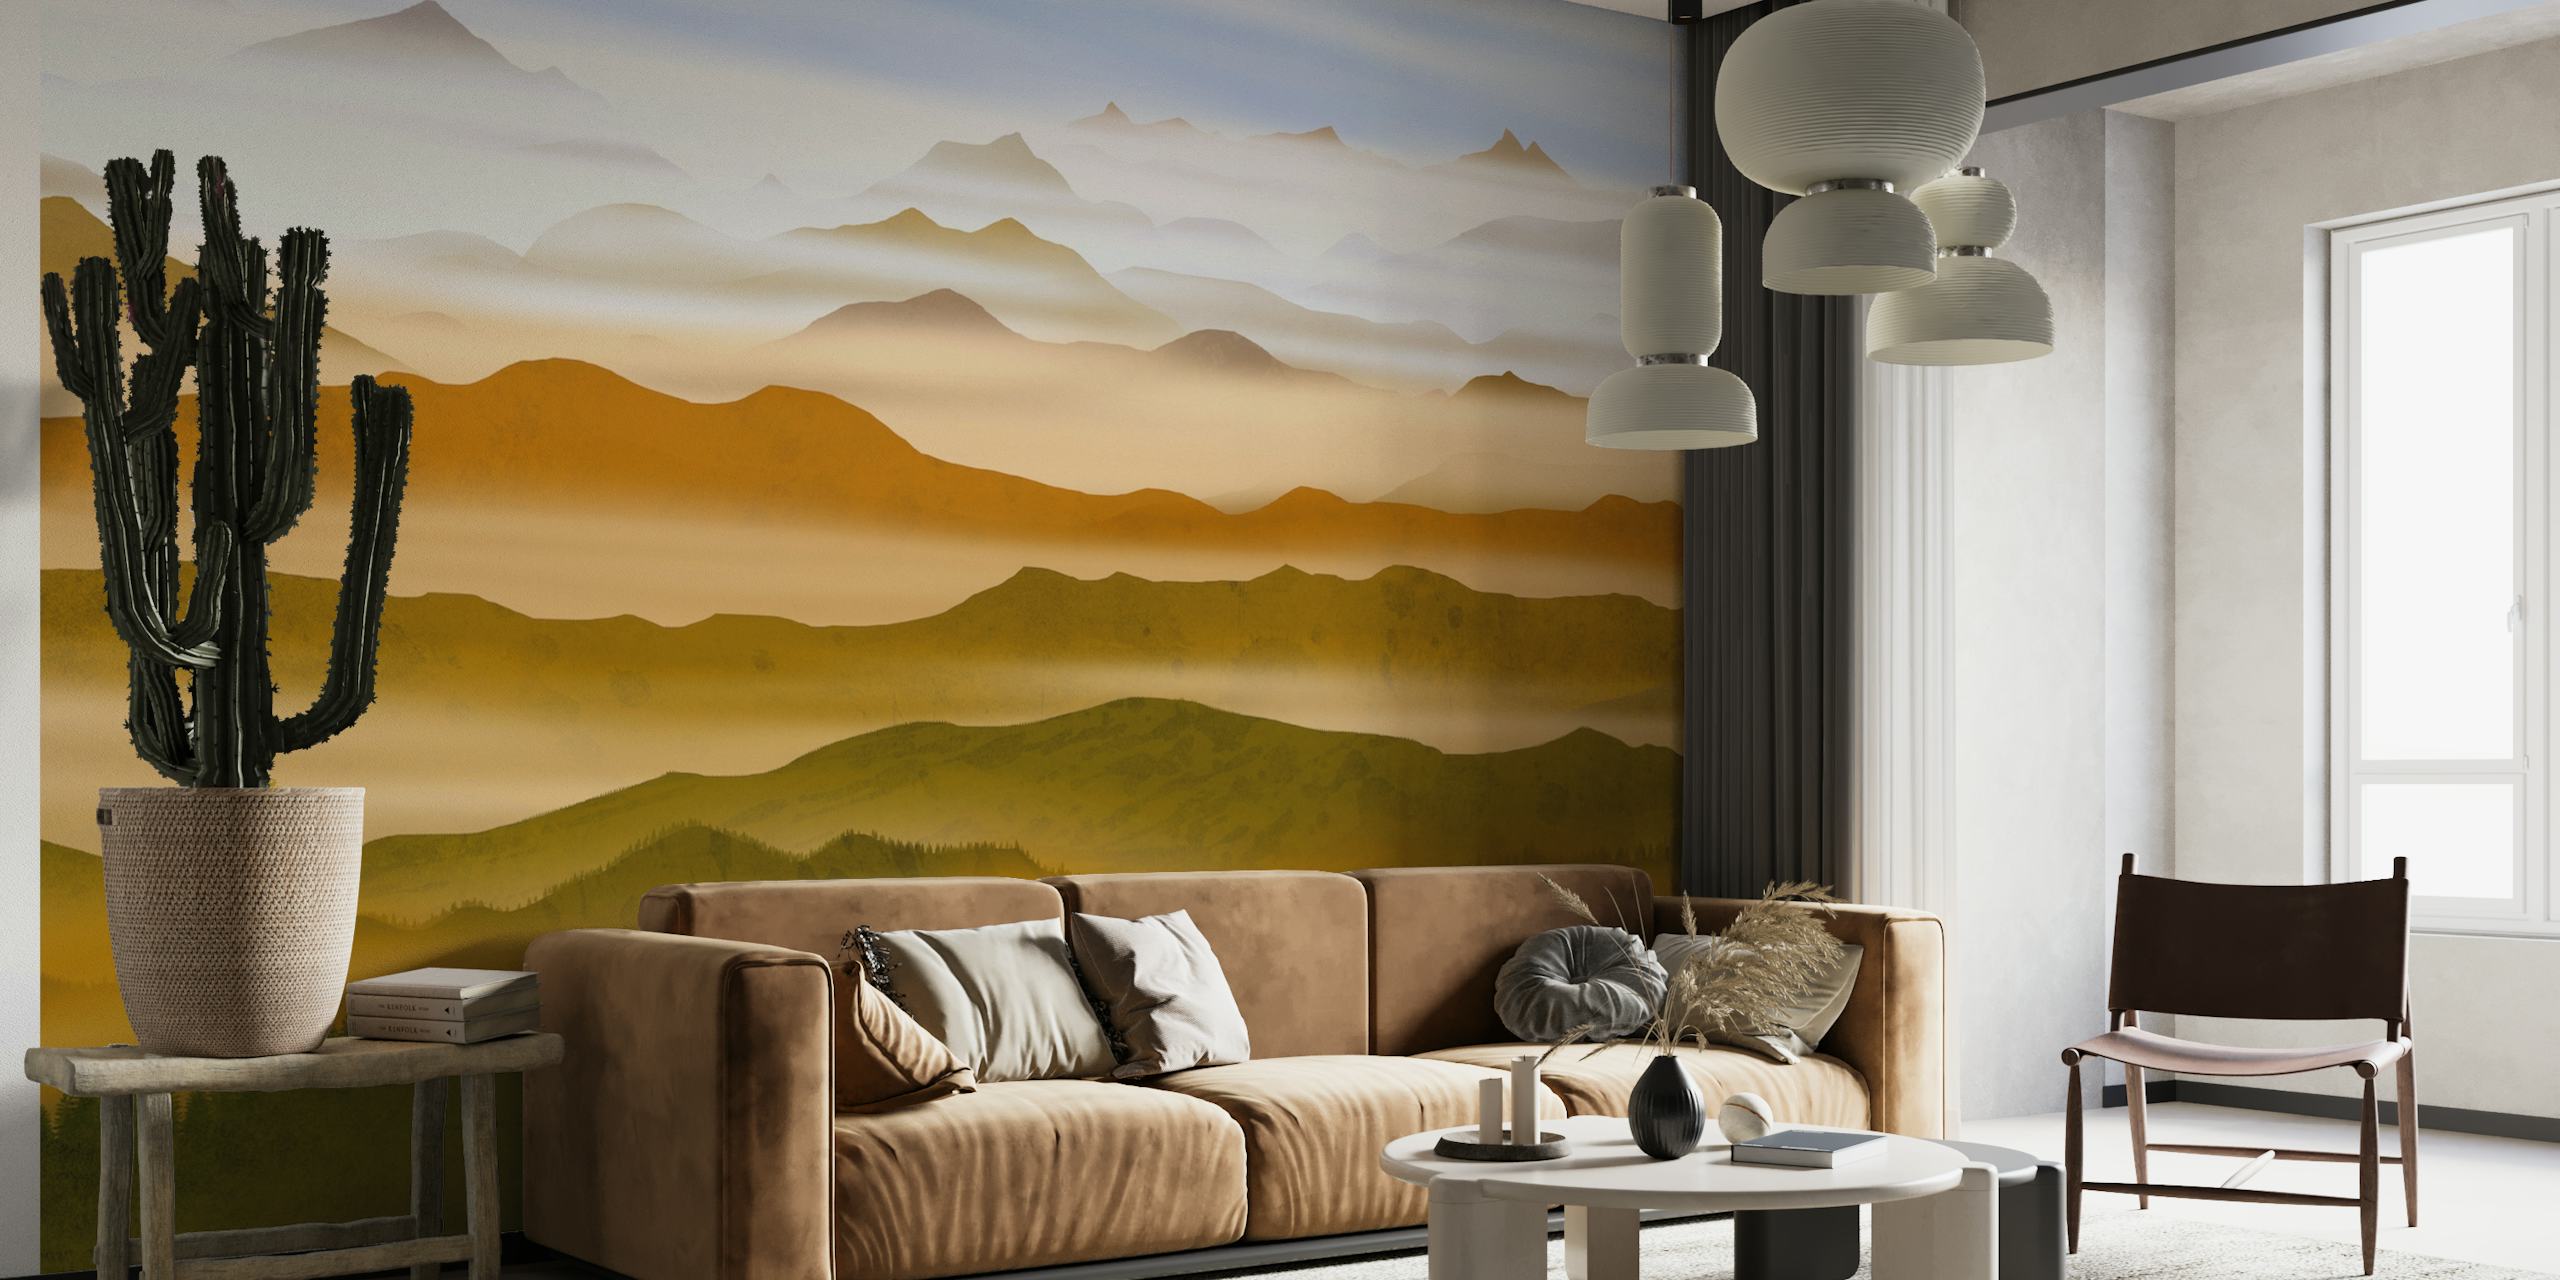 Pearl Valleys wall mural with layered hills and soft earth tones